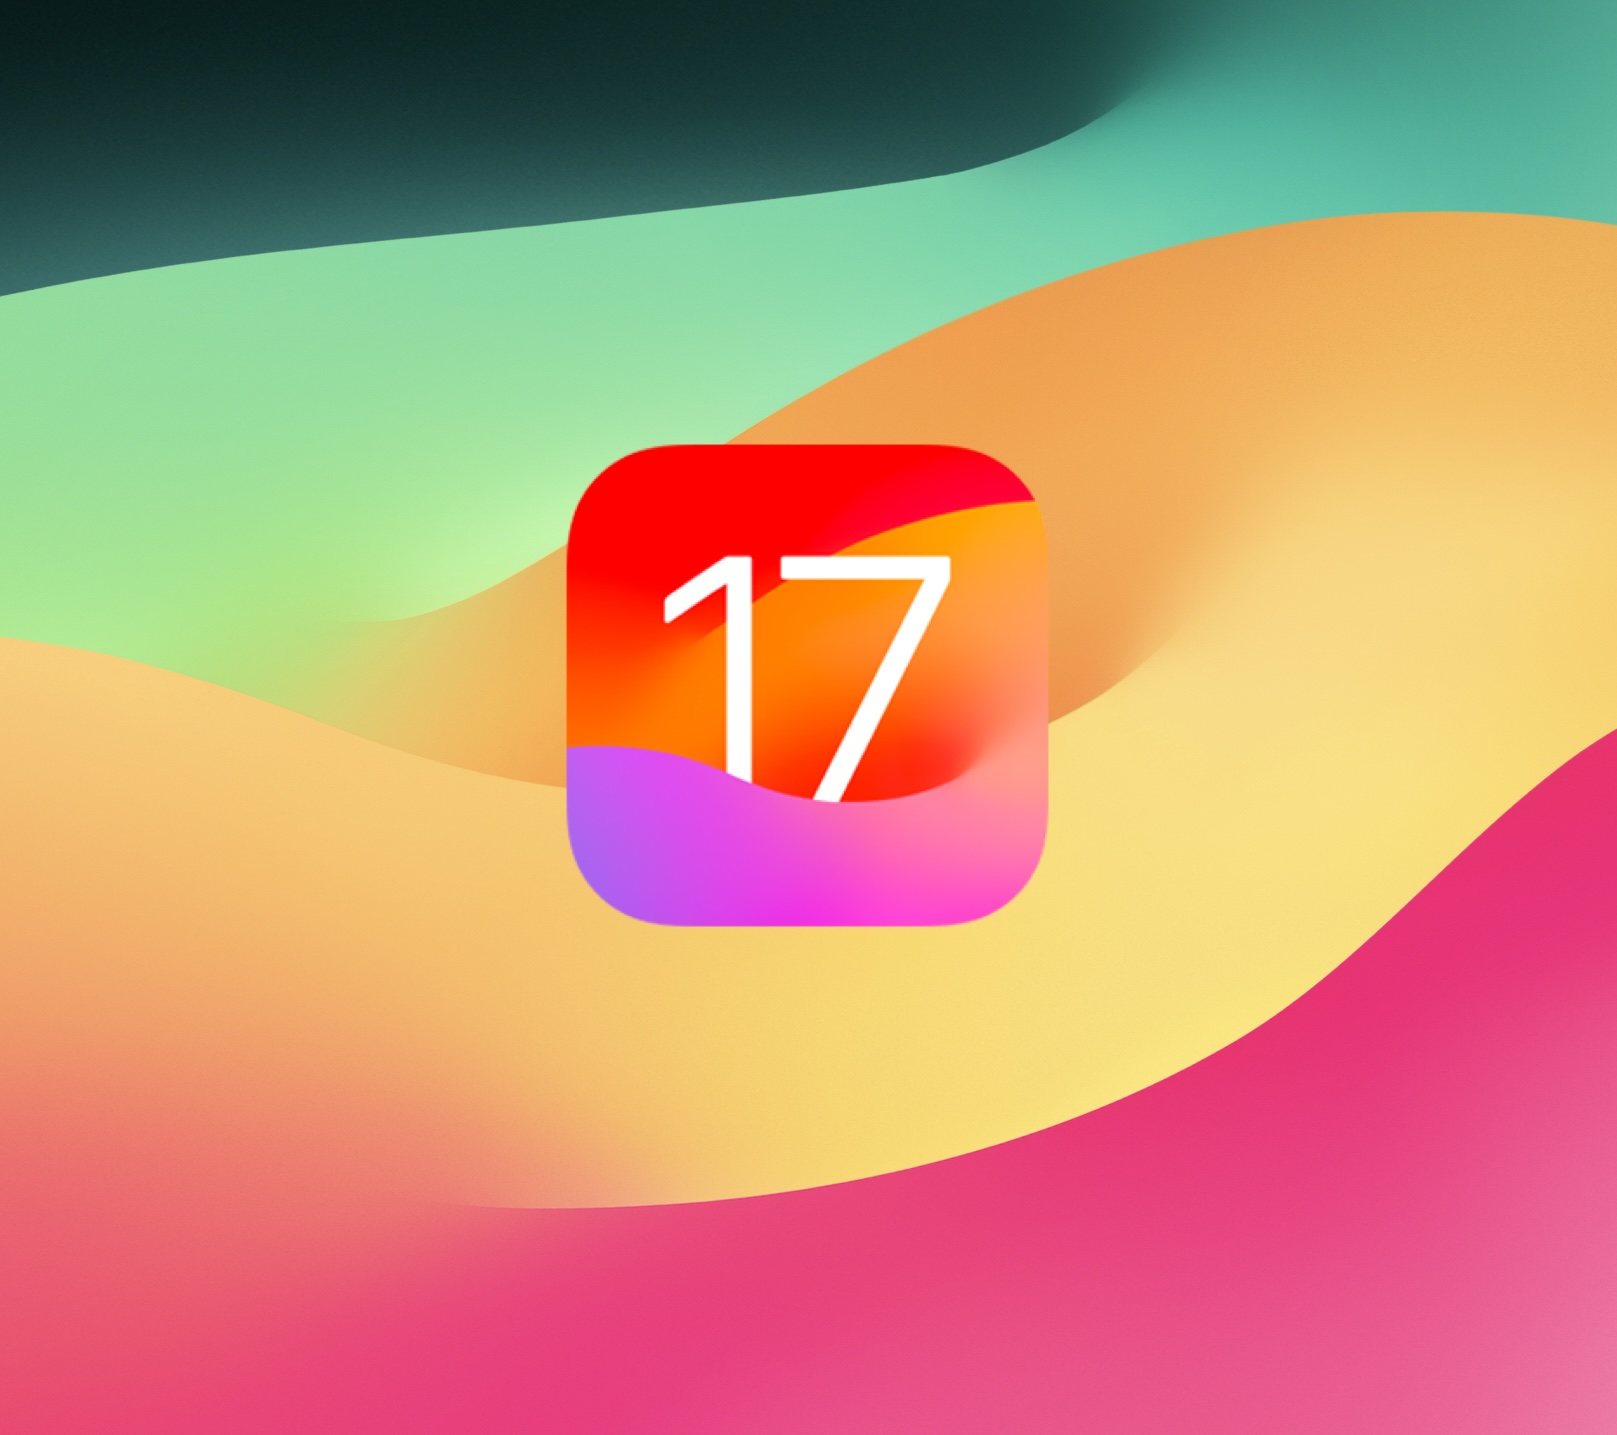 How to Install iPadOS 17 Update on iPad